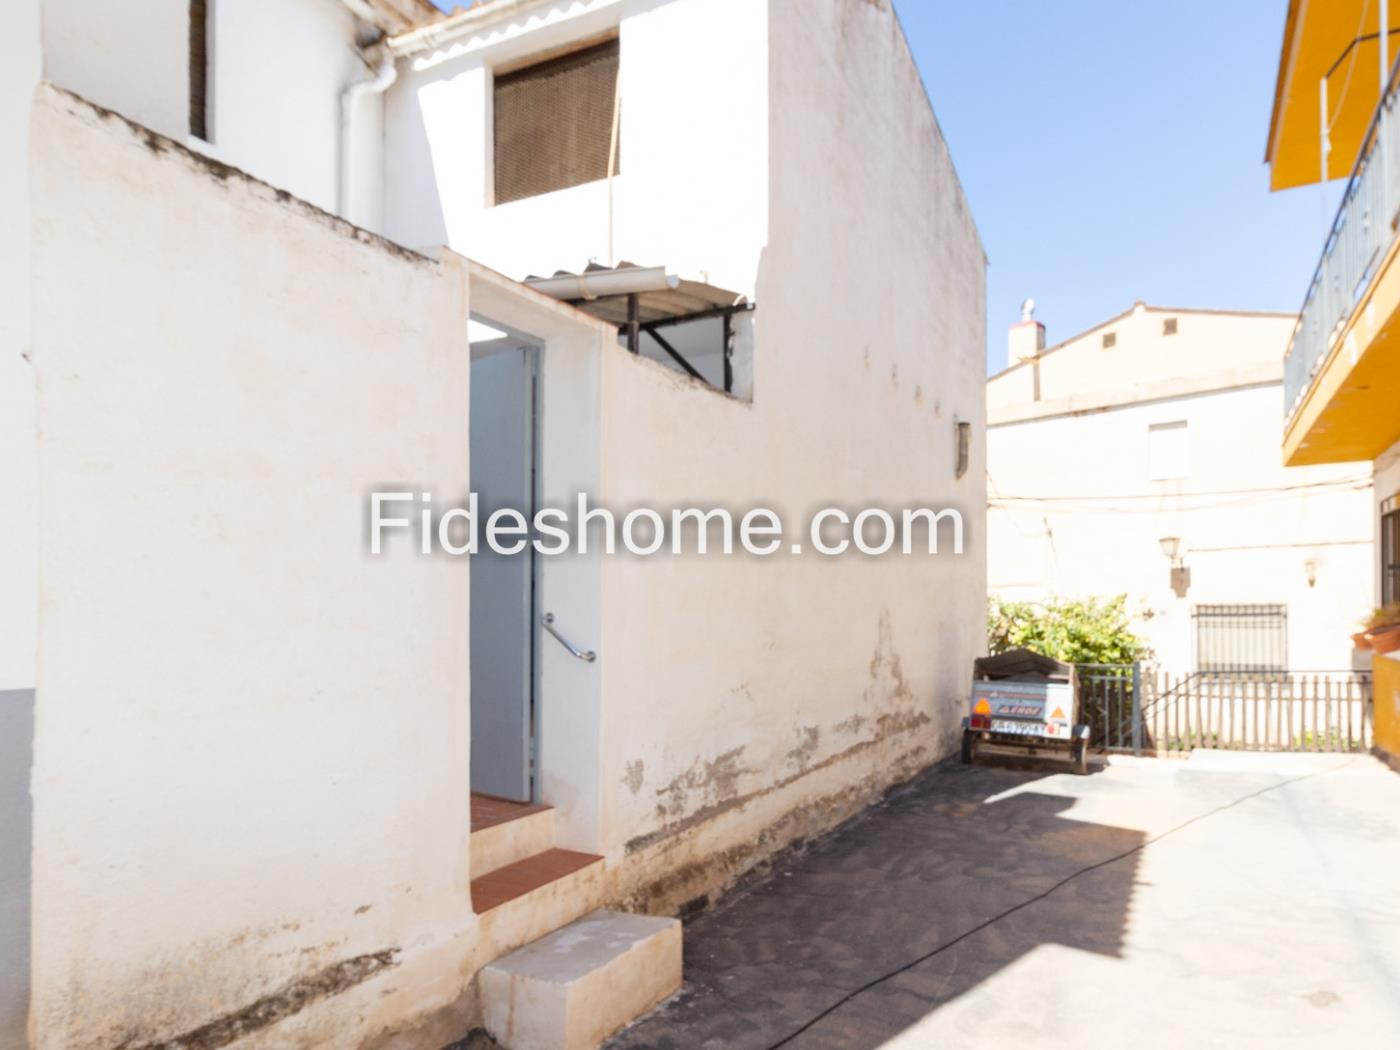 Townhouse with garage, terrace, and views in Albuñuelas. in Albuñuelas